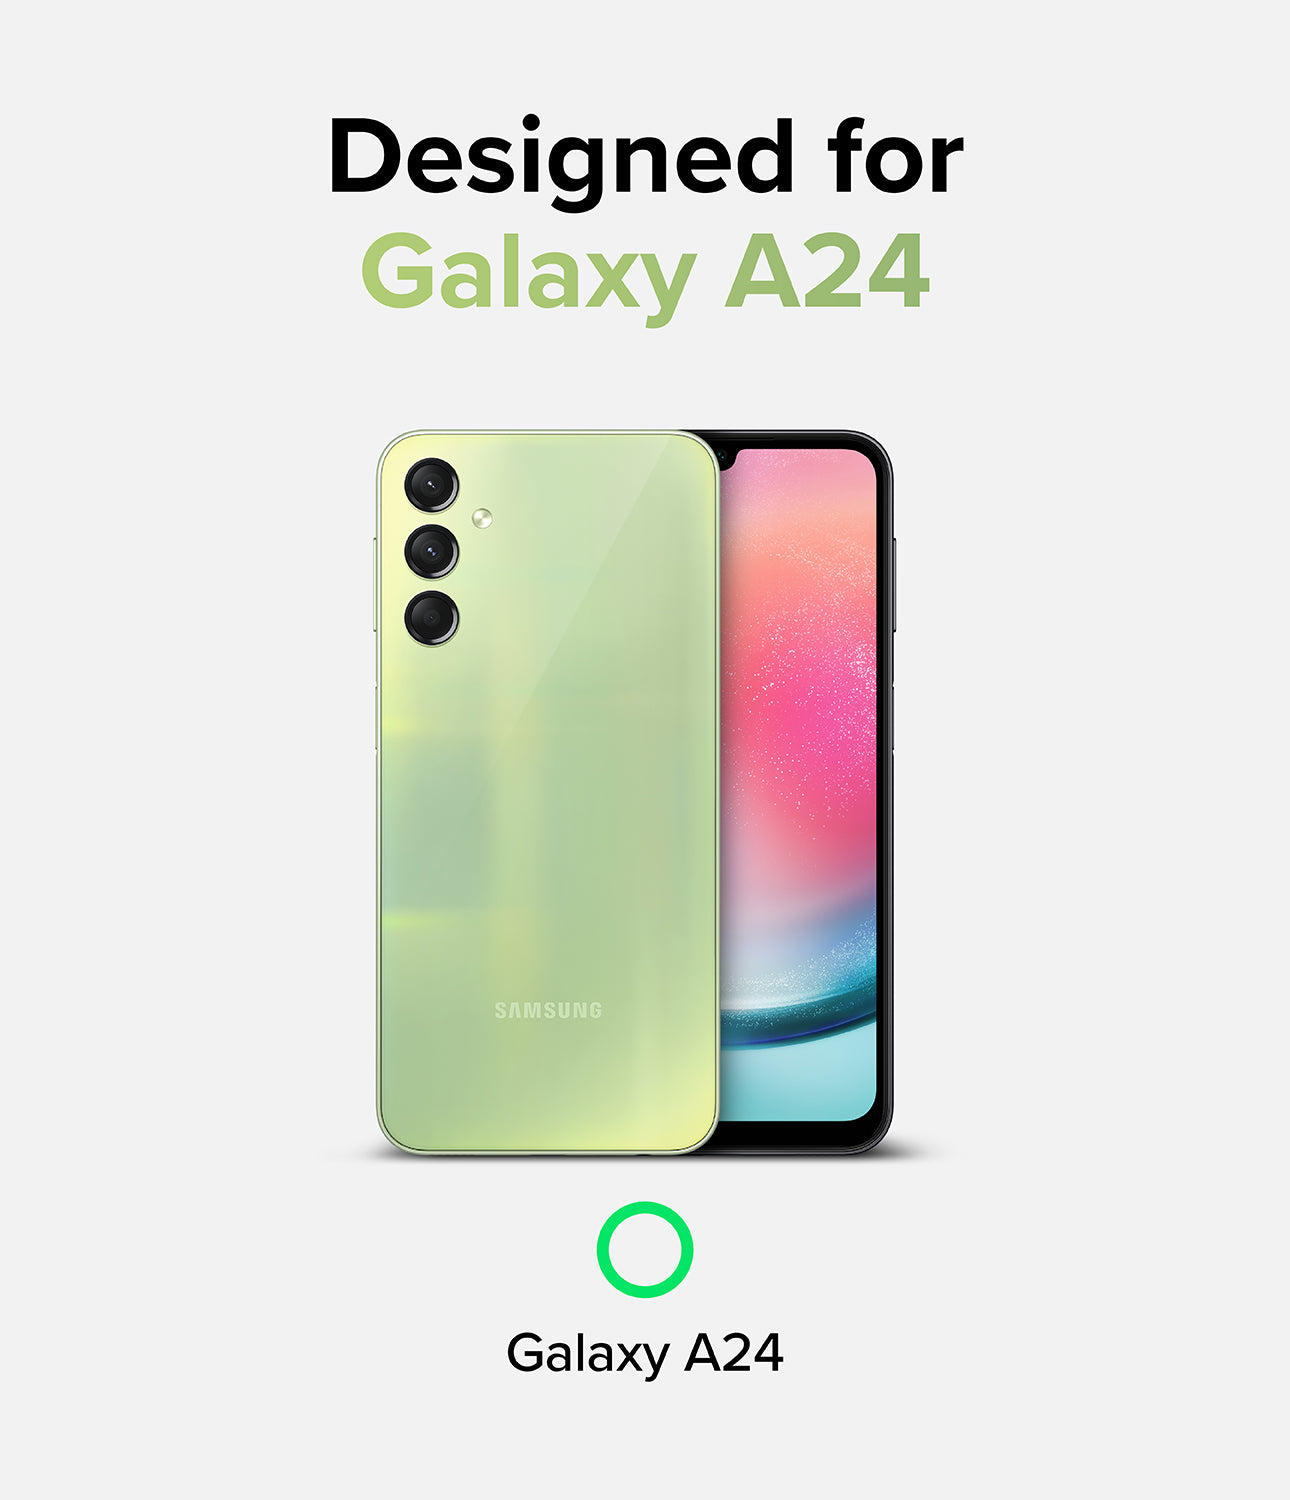 Designed for Galaxy A24